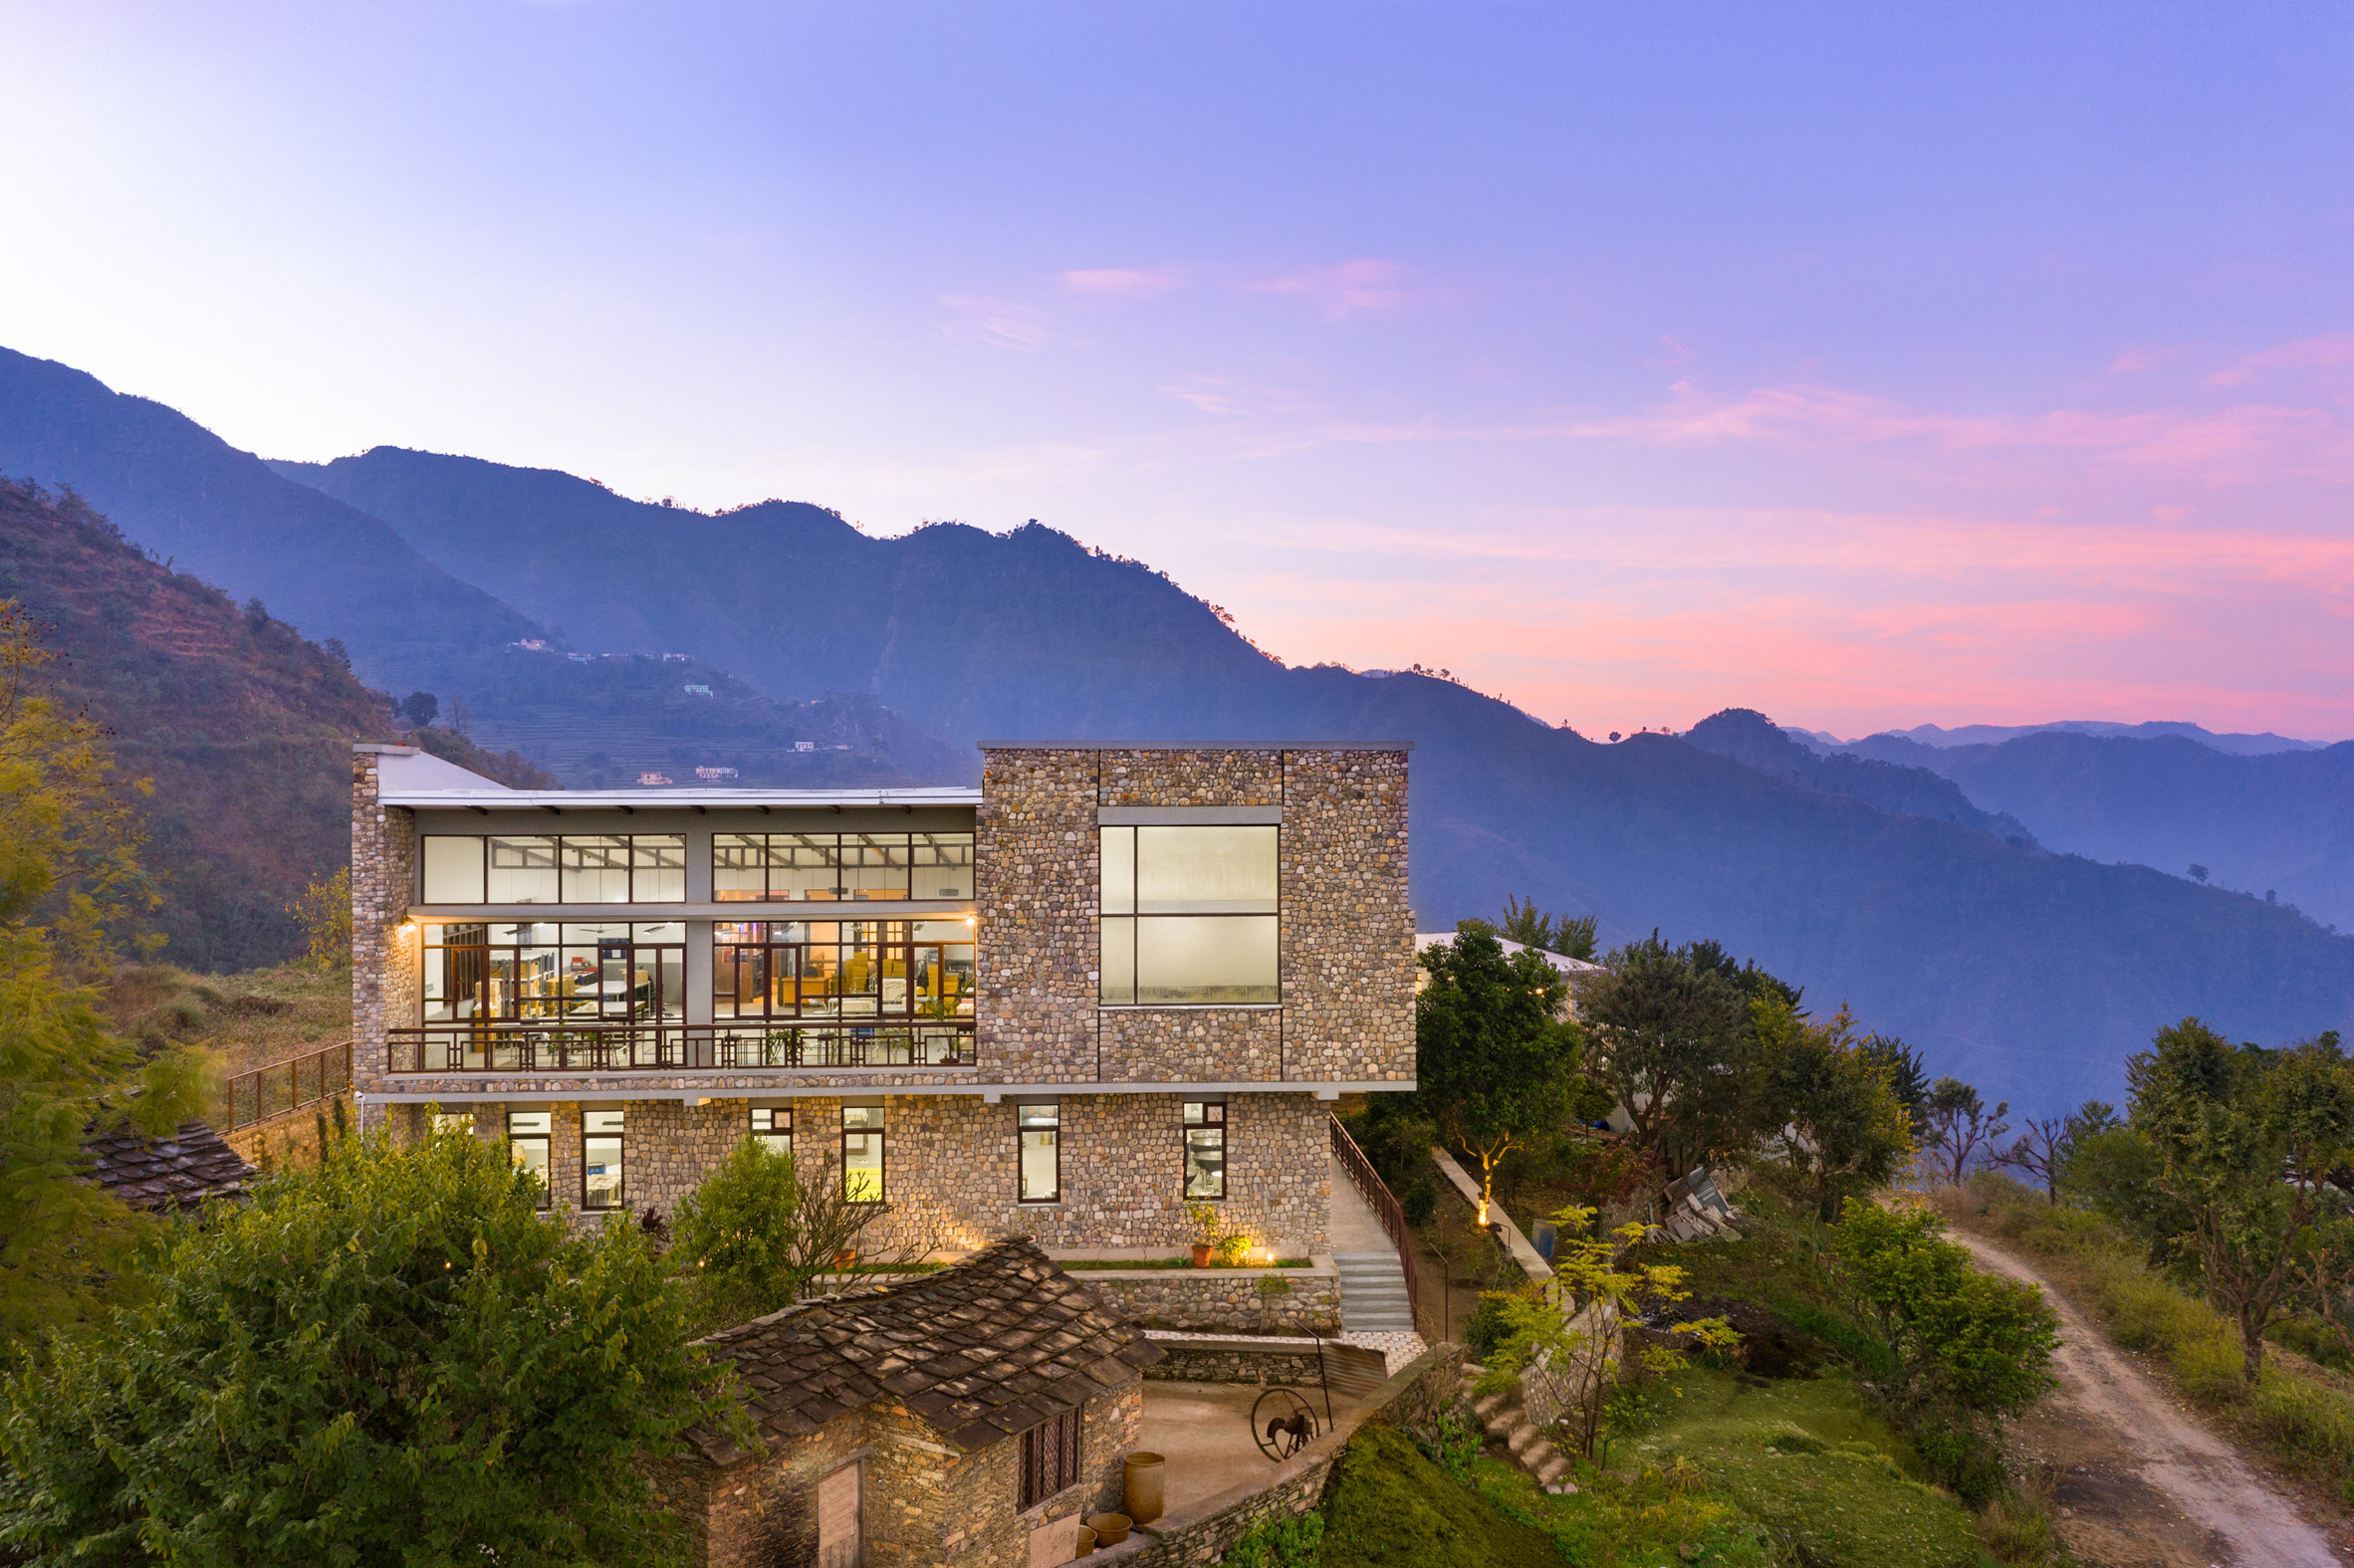 Stone-covered factory in the Himalayan foothills